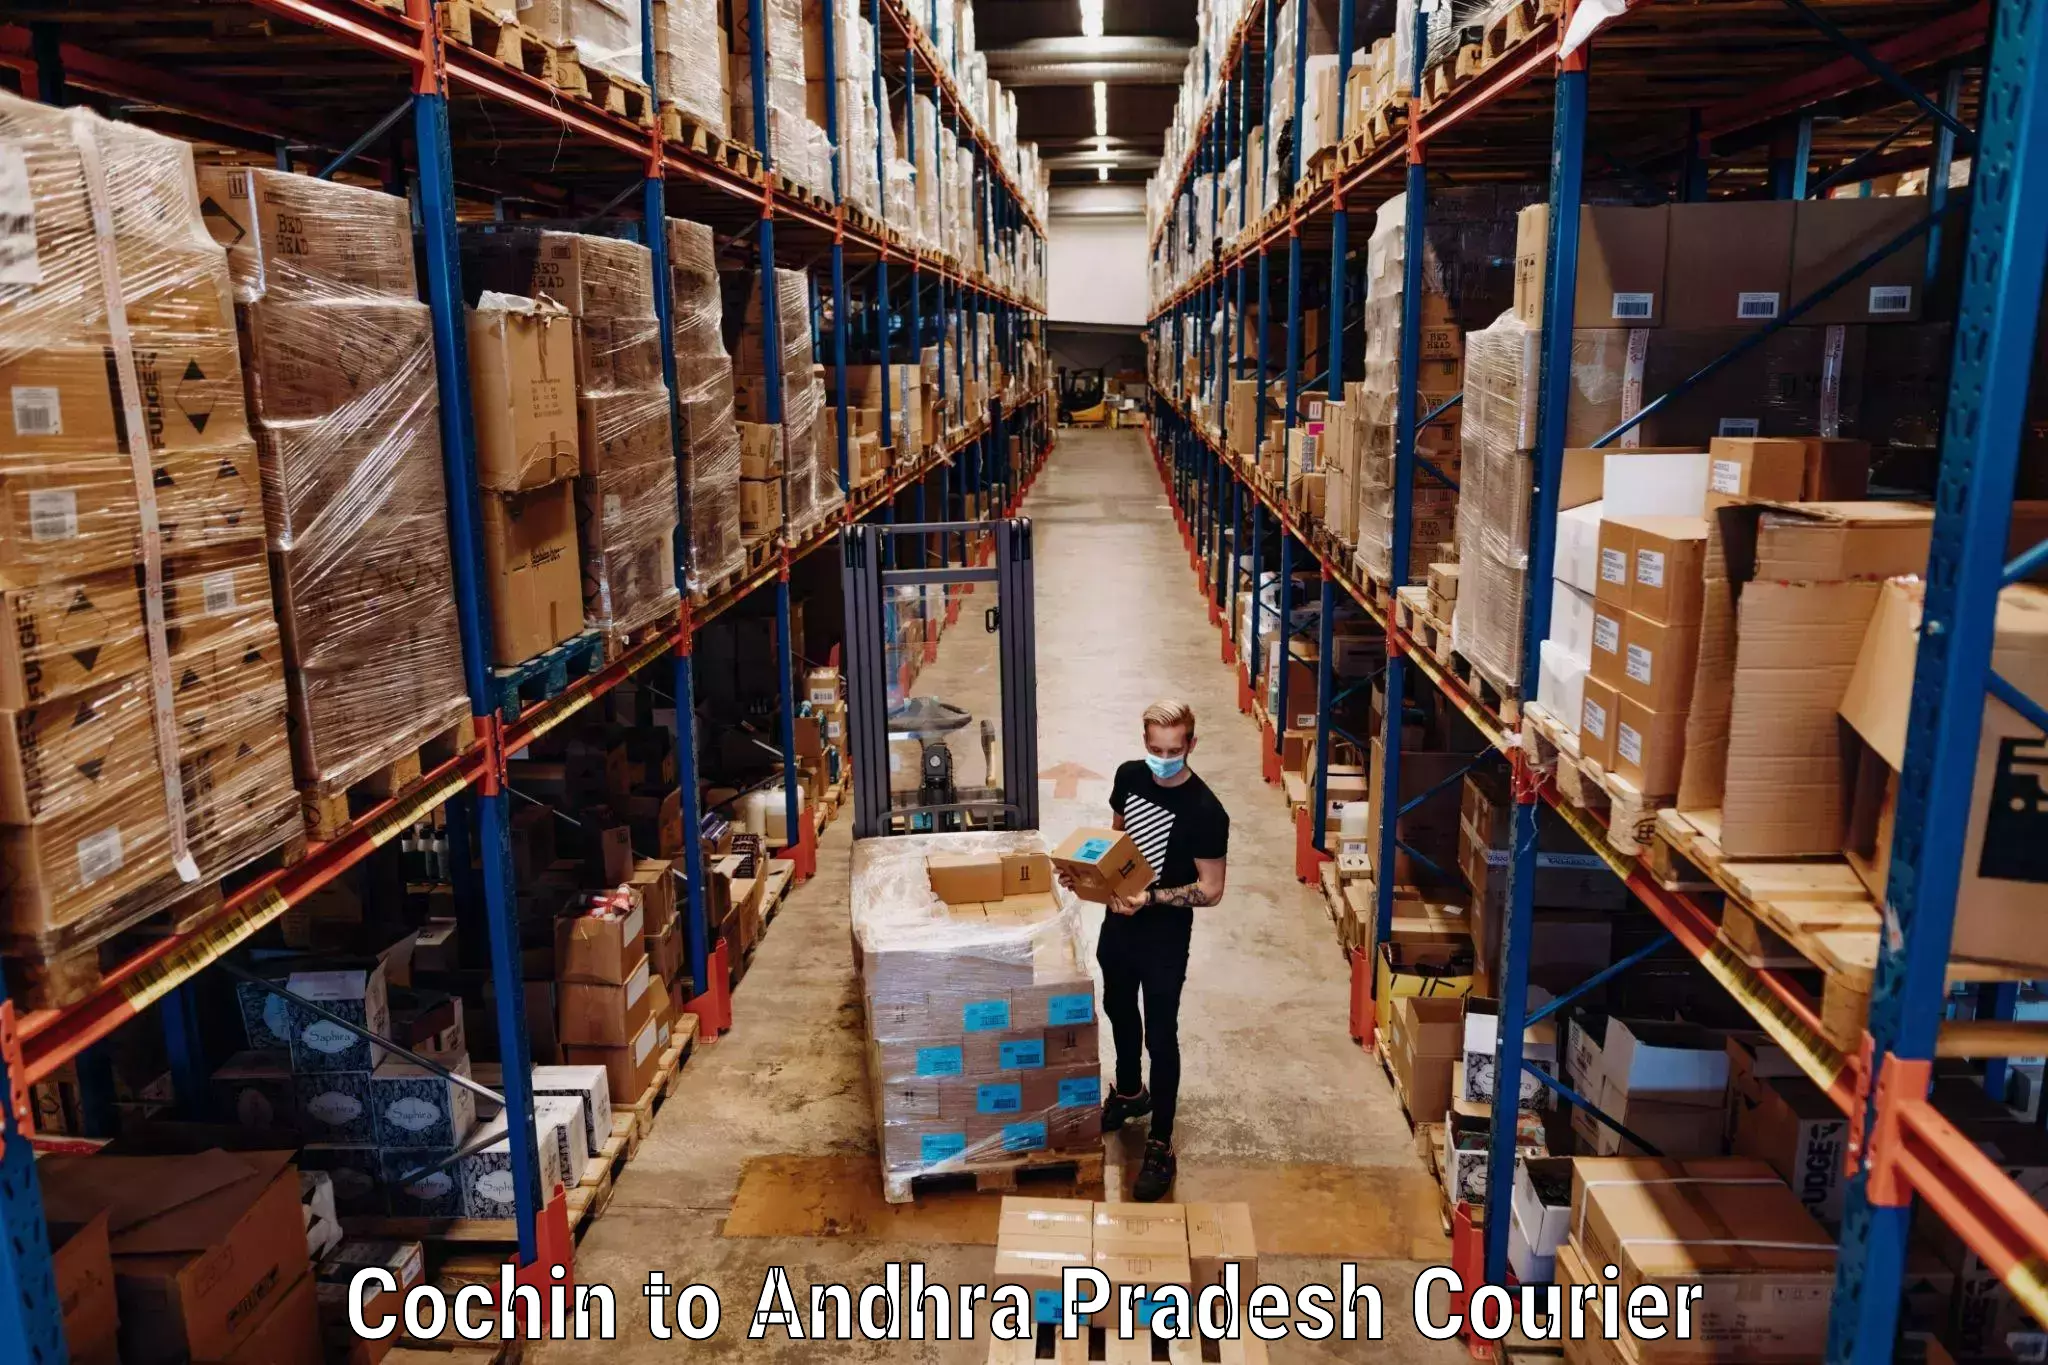 Luggage shipping specialists Cochin to Mudigubba